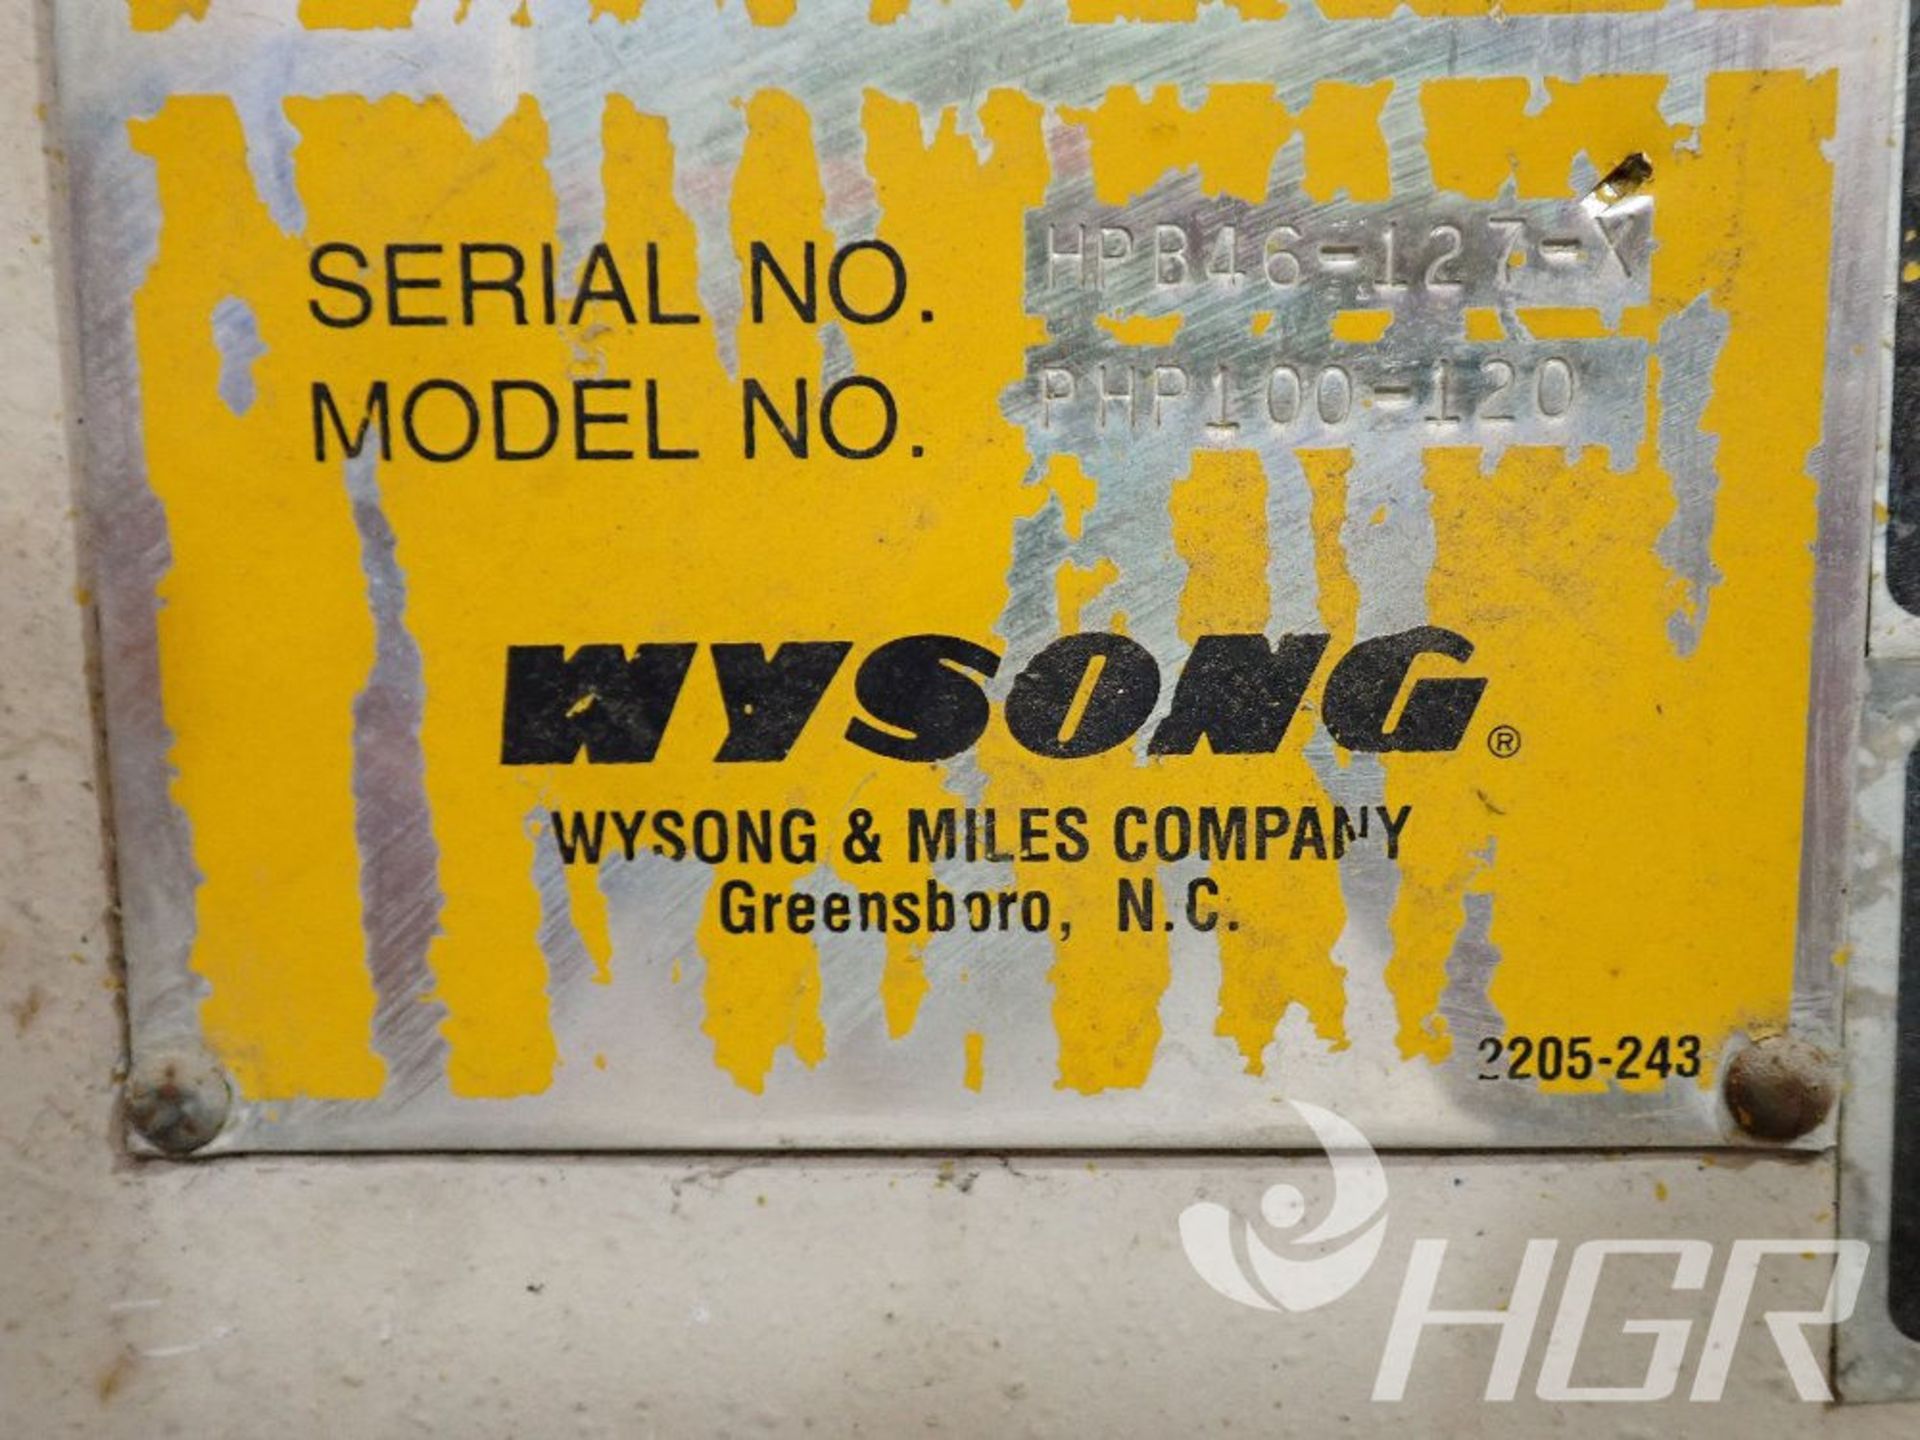 WYSONG CNC PRESS BRAKE, Model PHP100-120, Date: n/a; s/n HPB46-127-X, Approx. Capacity: 100 TON 10', - Image 4 of 25